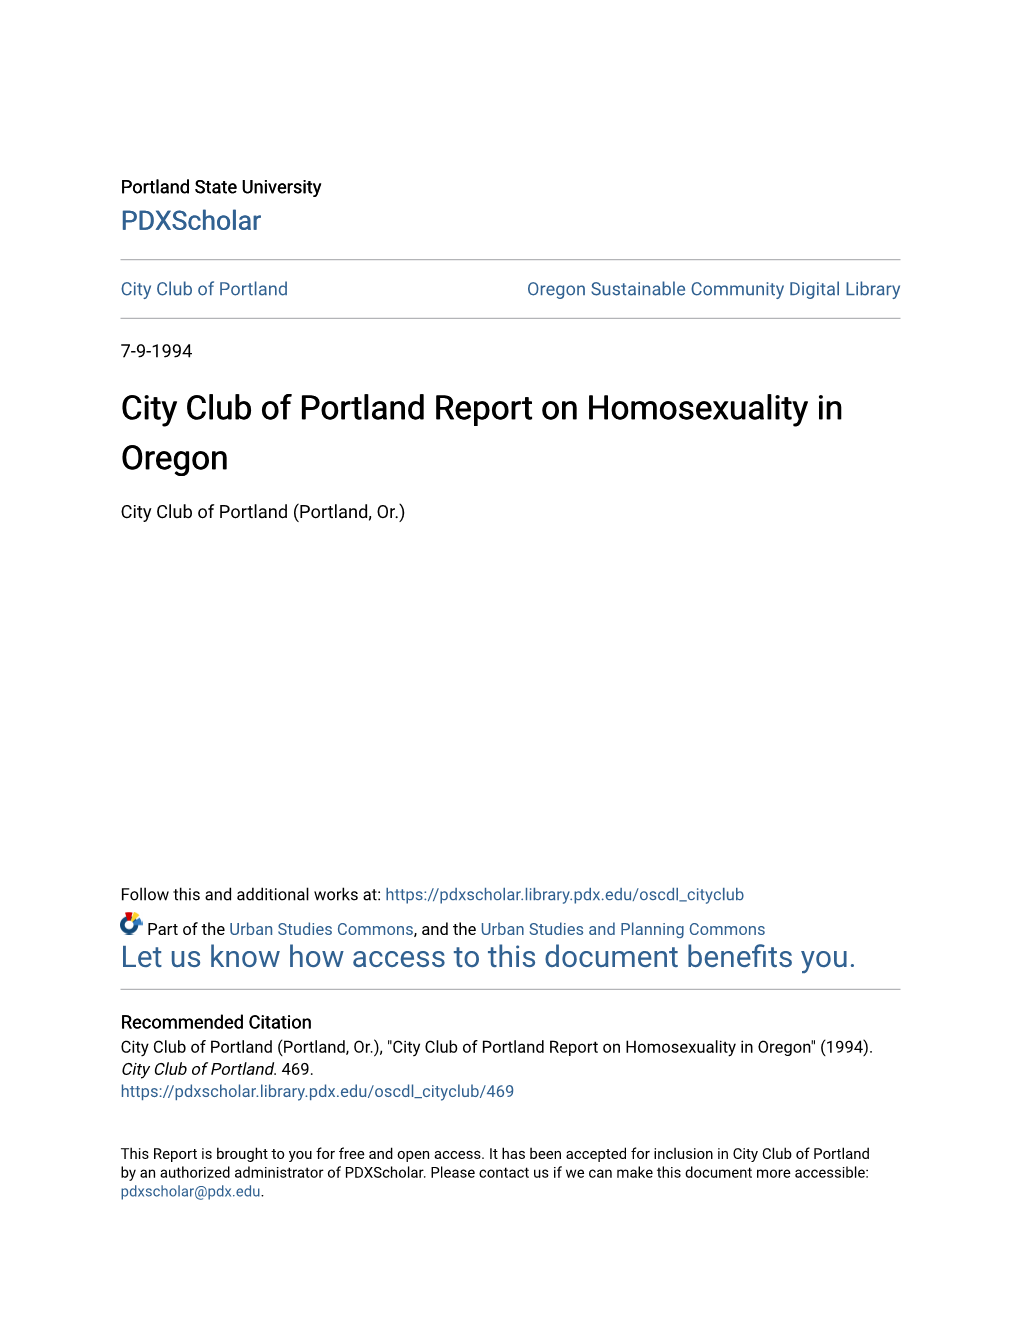 City Club of Portland Report on Homosexuality in Oregon